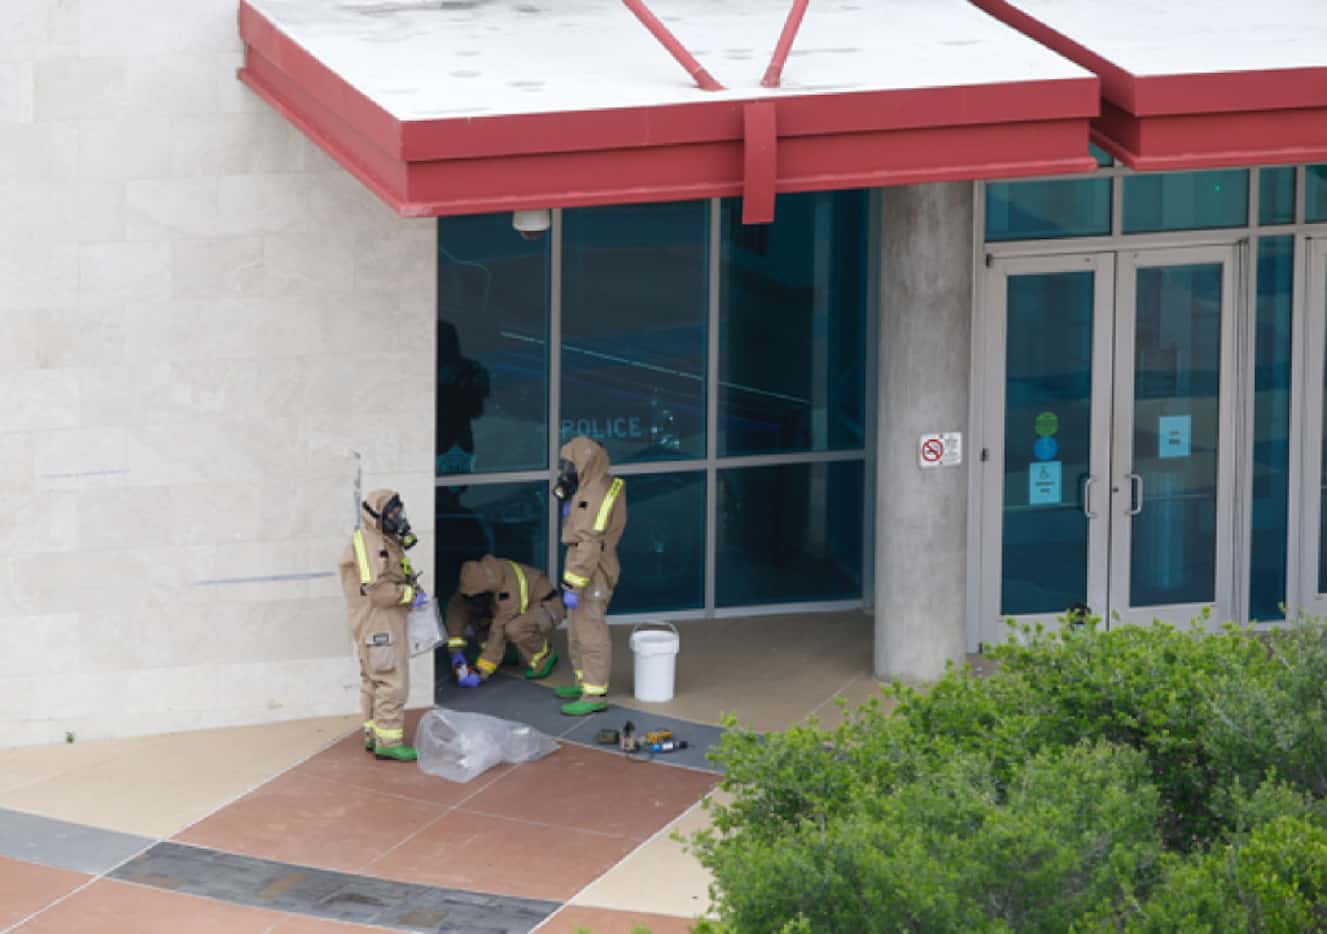 Police officers and firefighters respond to  a suspicious package was found near the north...